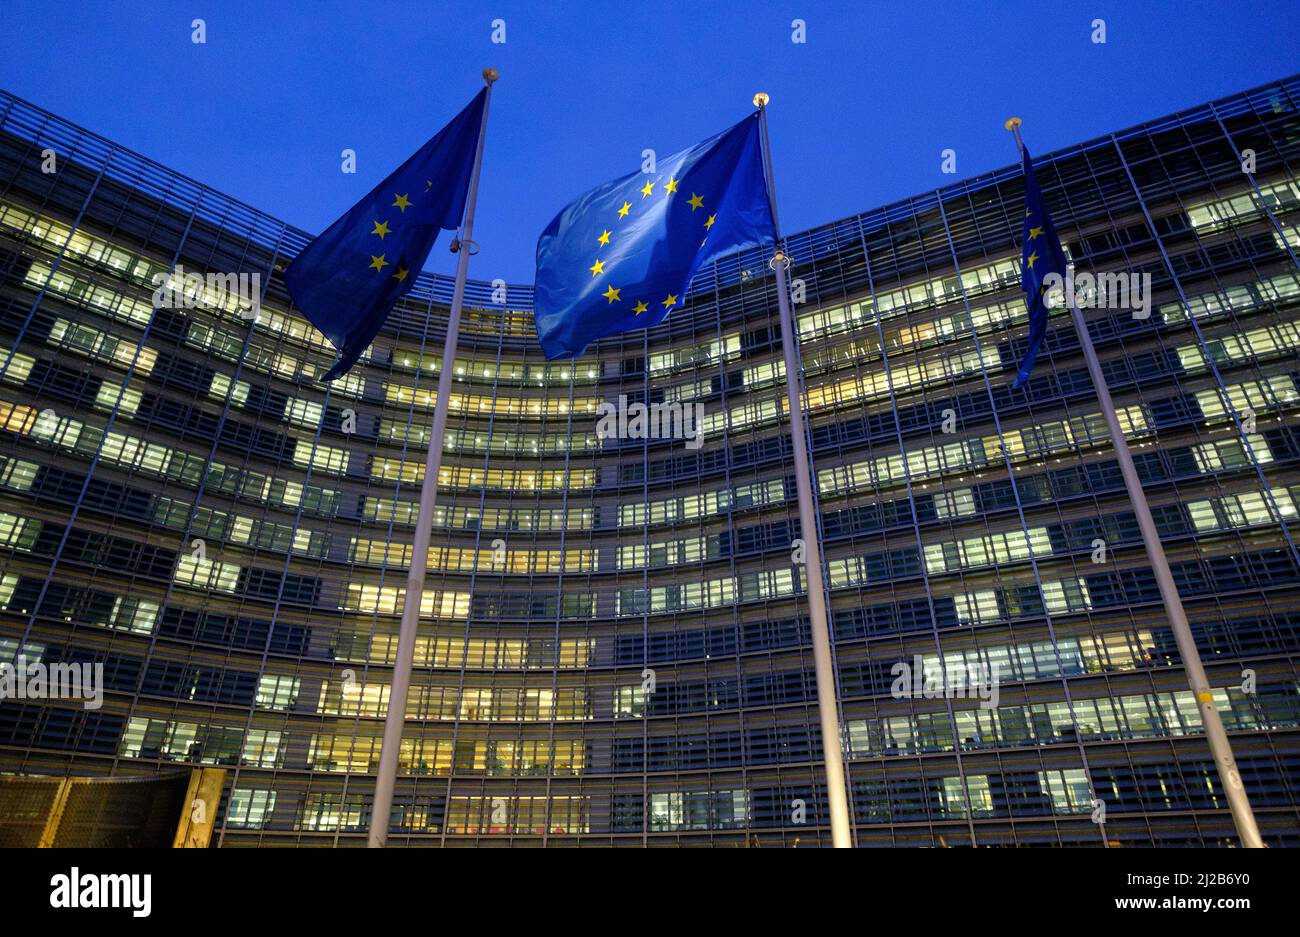 Belgium, Brussels: European Union Flags in front of the Berlaymont building, headquarters of the European Commission, in the evening Stock Photo